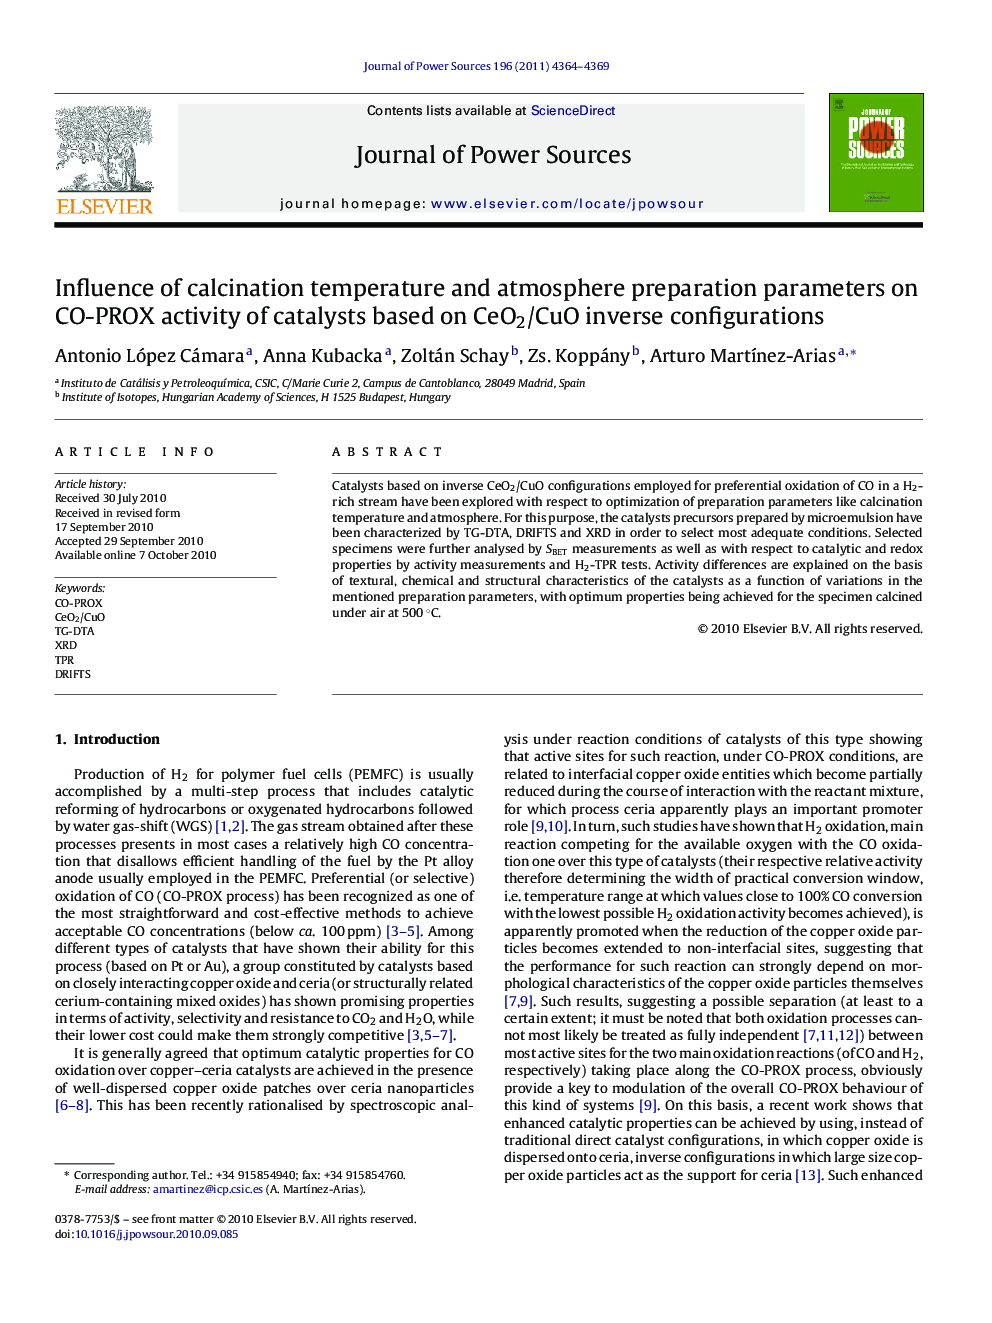 Influence of calcination temperature and atmosphere preparation parameters on CO-PROX activity of catalysts based on CeO2/CuO inverse configurations